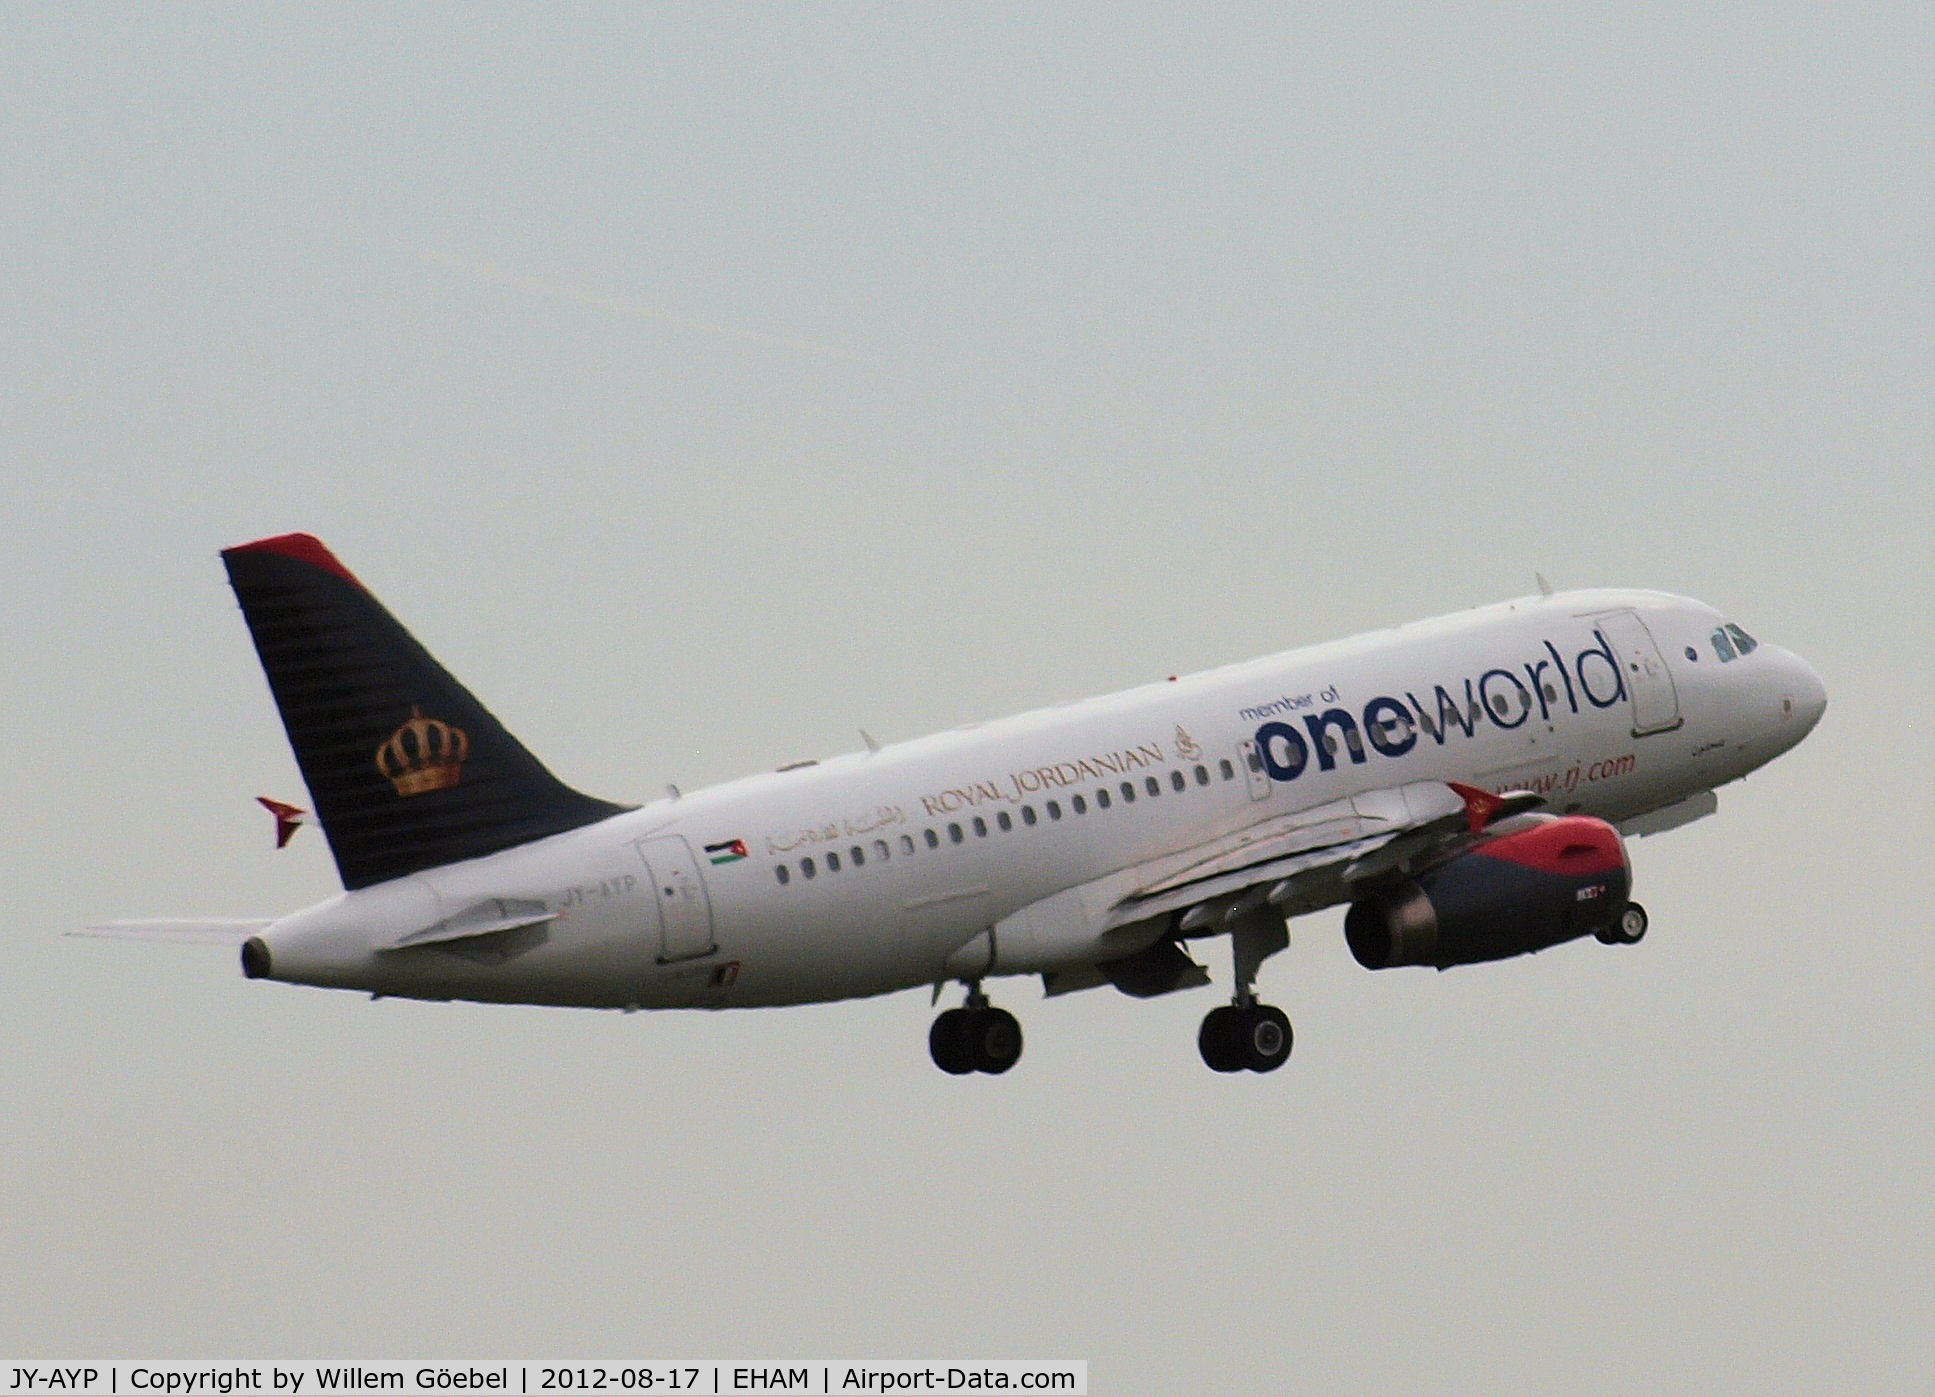 JY-AYP, 2009 Airbus A319-132 C/N 3832, Take off from runway L18 of Schiphol Airport.